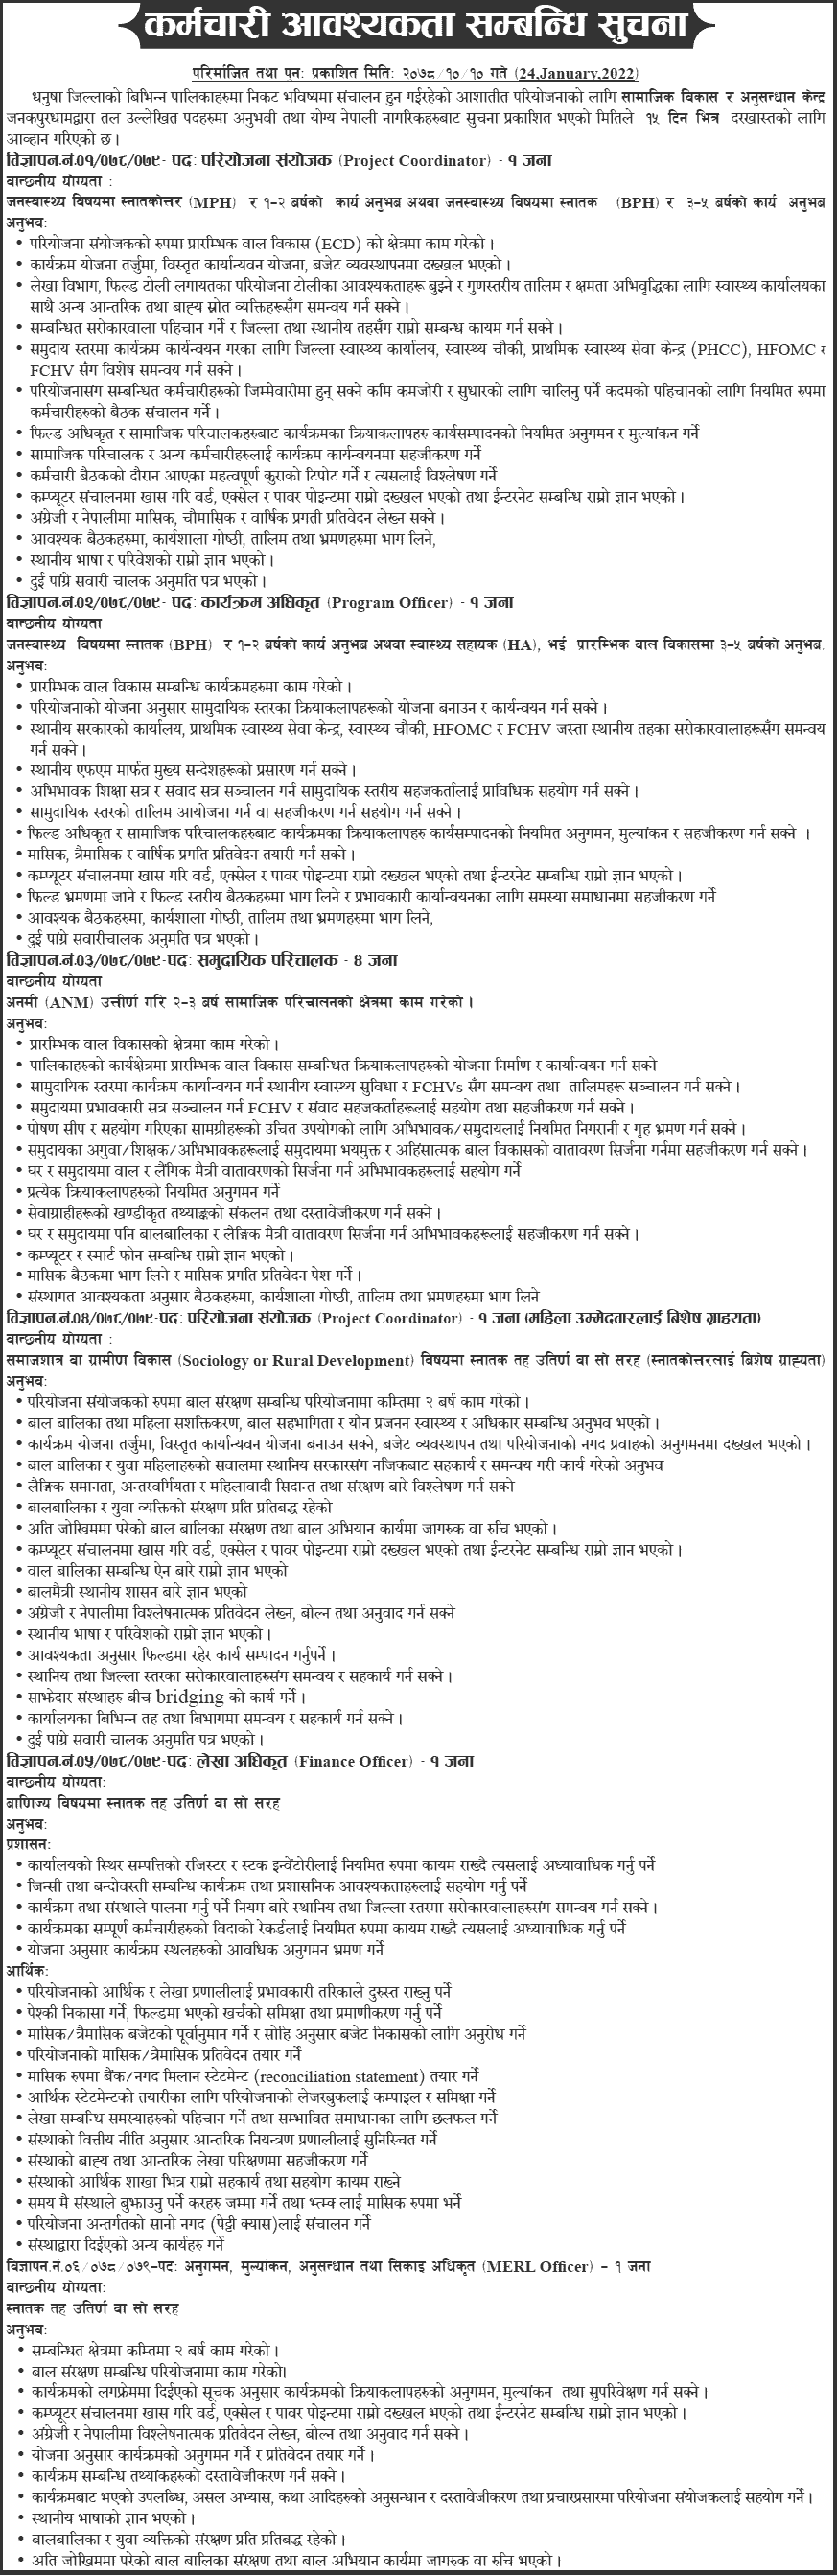 Social Development and Research Center Vacancy for Various Post